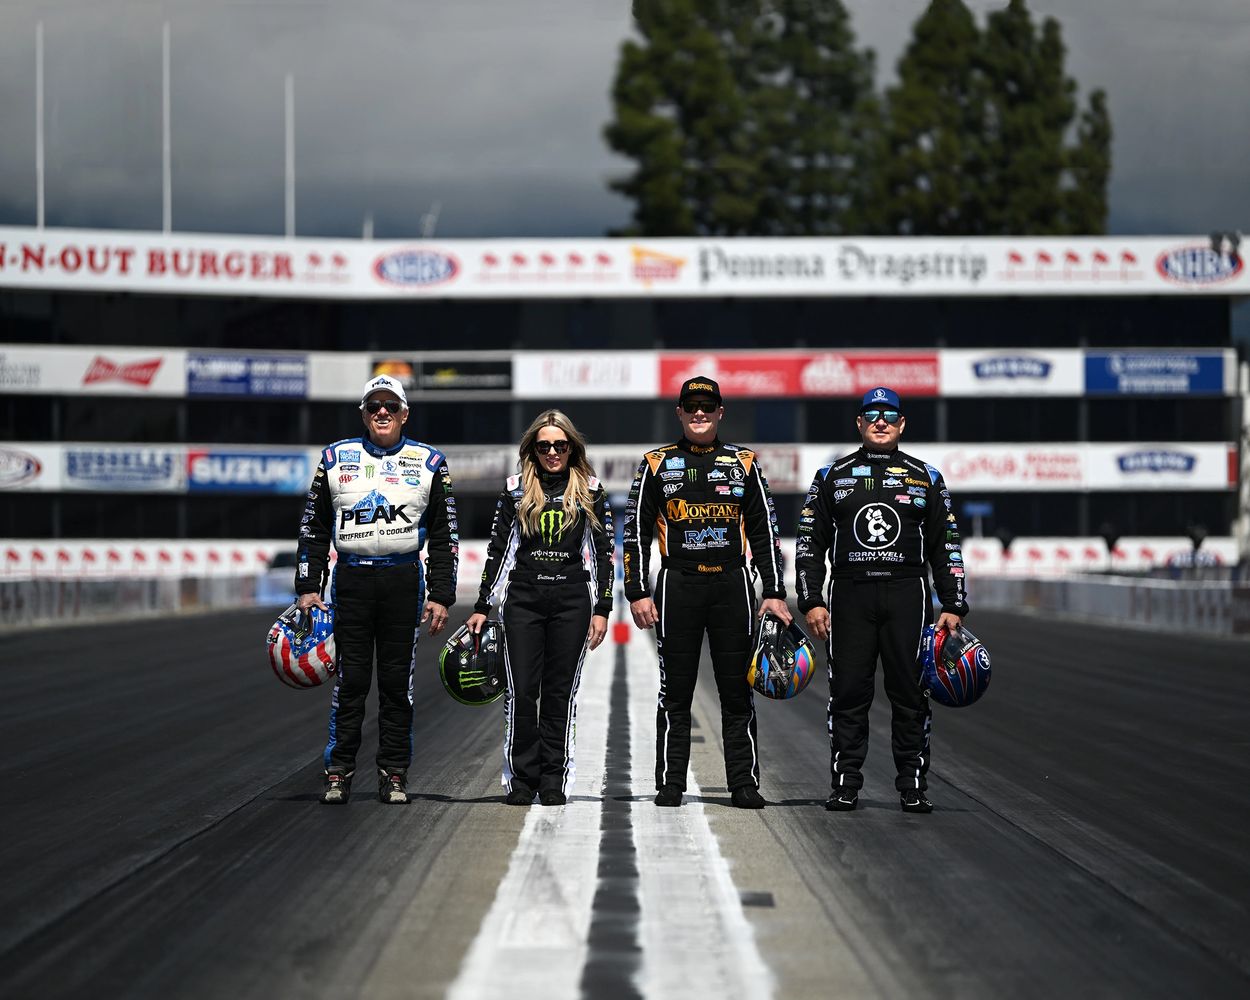 John Force Racing Drivers walking down the race track. L to R: John, Brittany, Austin, and Robert.